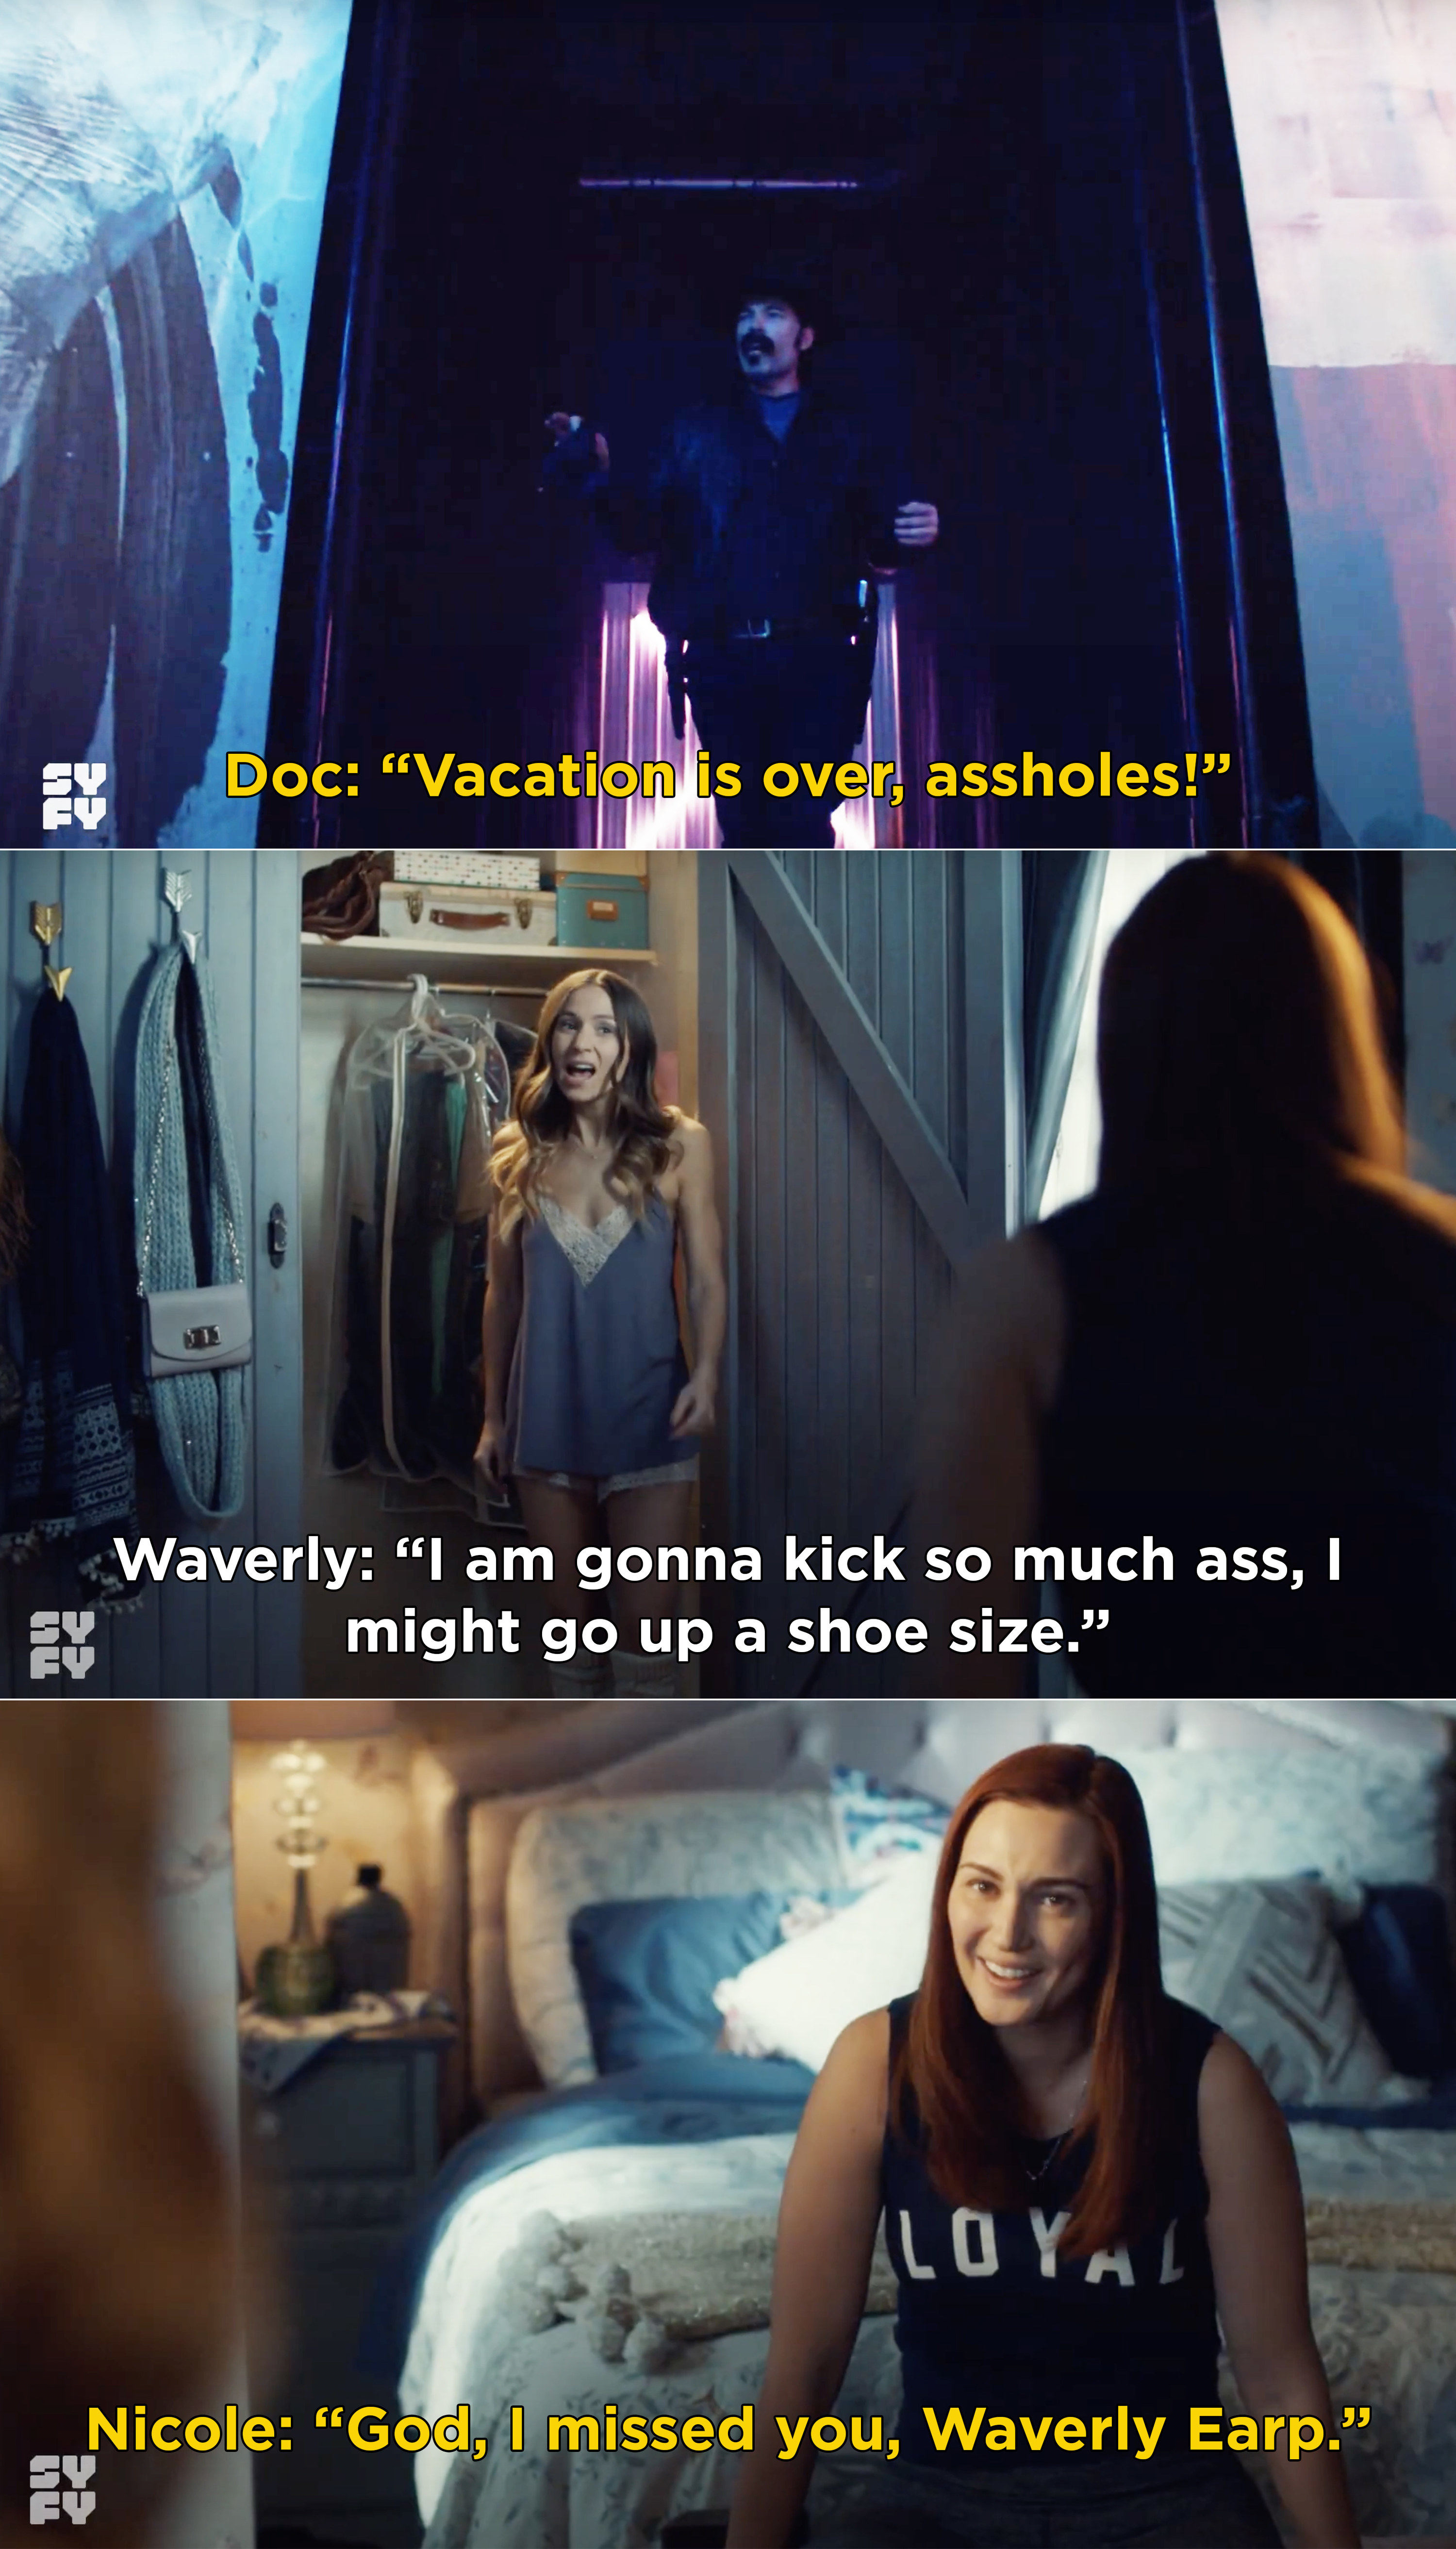 Doc saying, &quot;Vacation is over, assholes&quot; and Waverly telling Nicole she&#x27;s going to kick so much ass, and Nicole responding &quot;God, I missed you, Waverly Earp&quot;